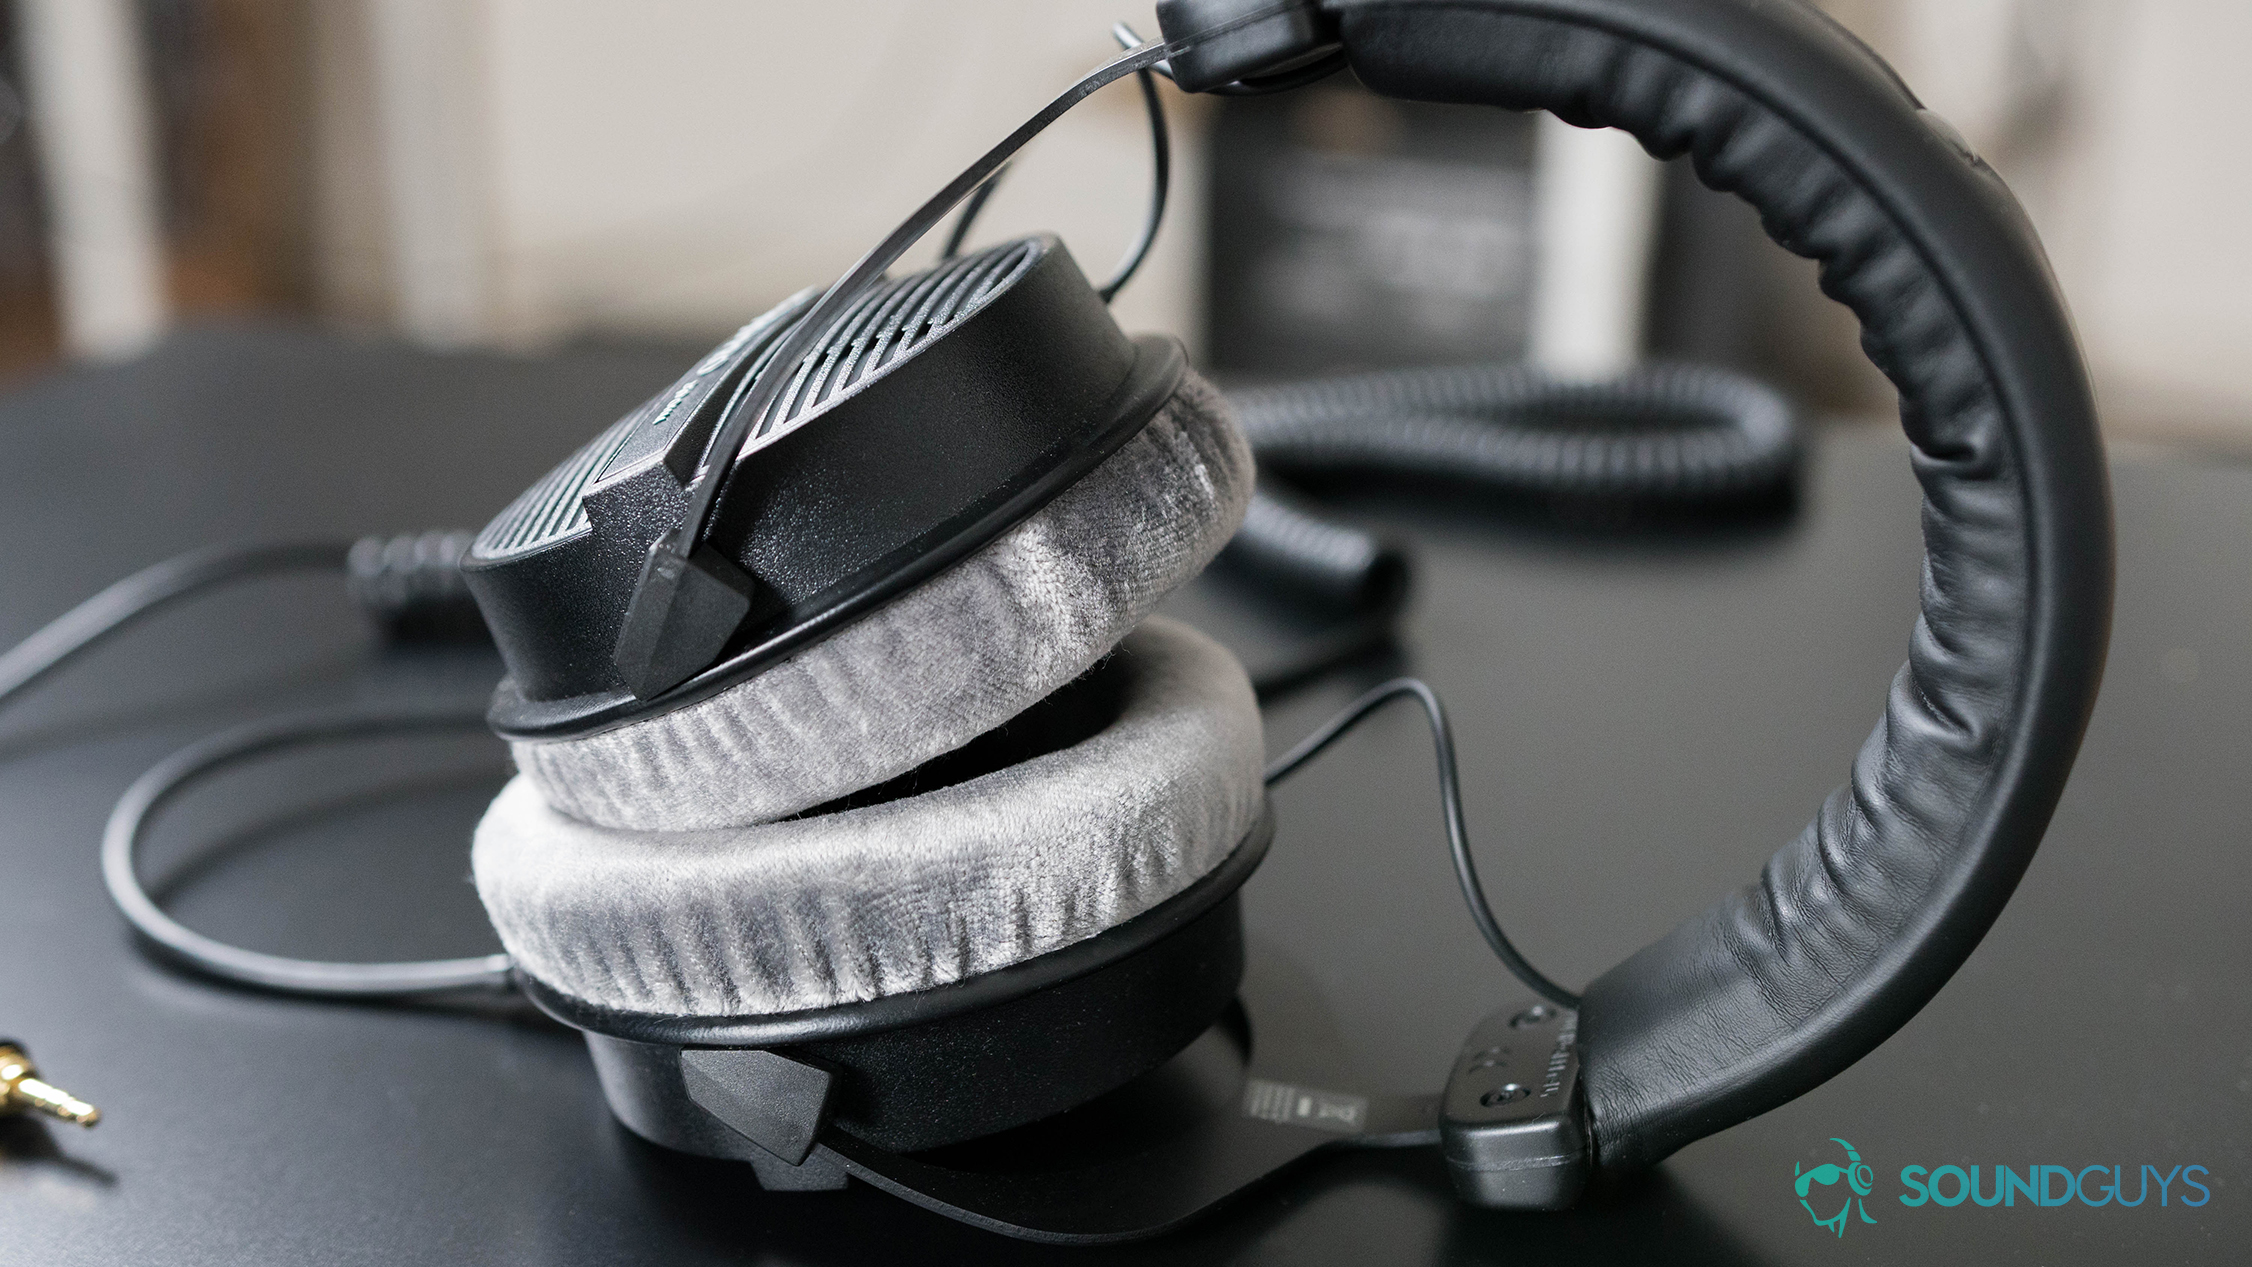 A photo of the Beyerdynamic DT 990 PRO studio headphones and their silver velour ear pads.